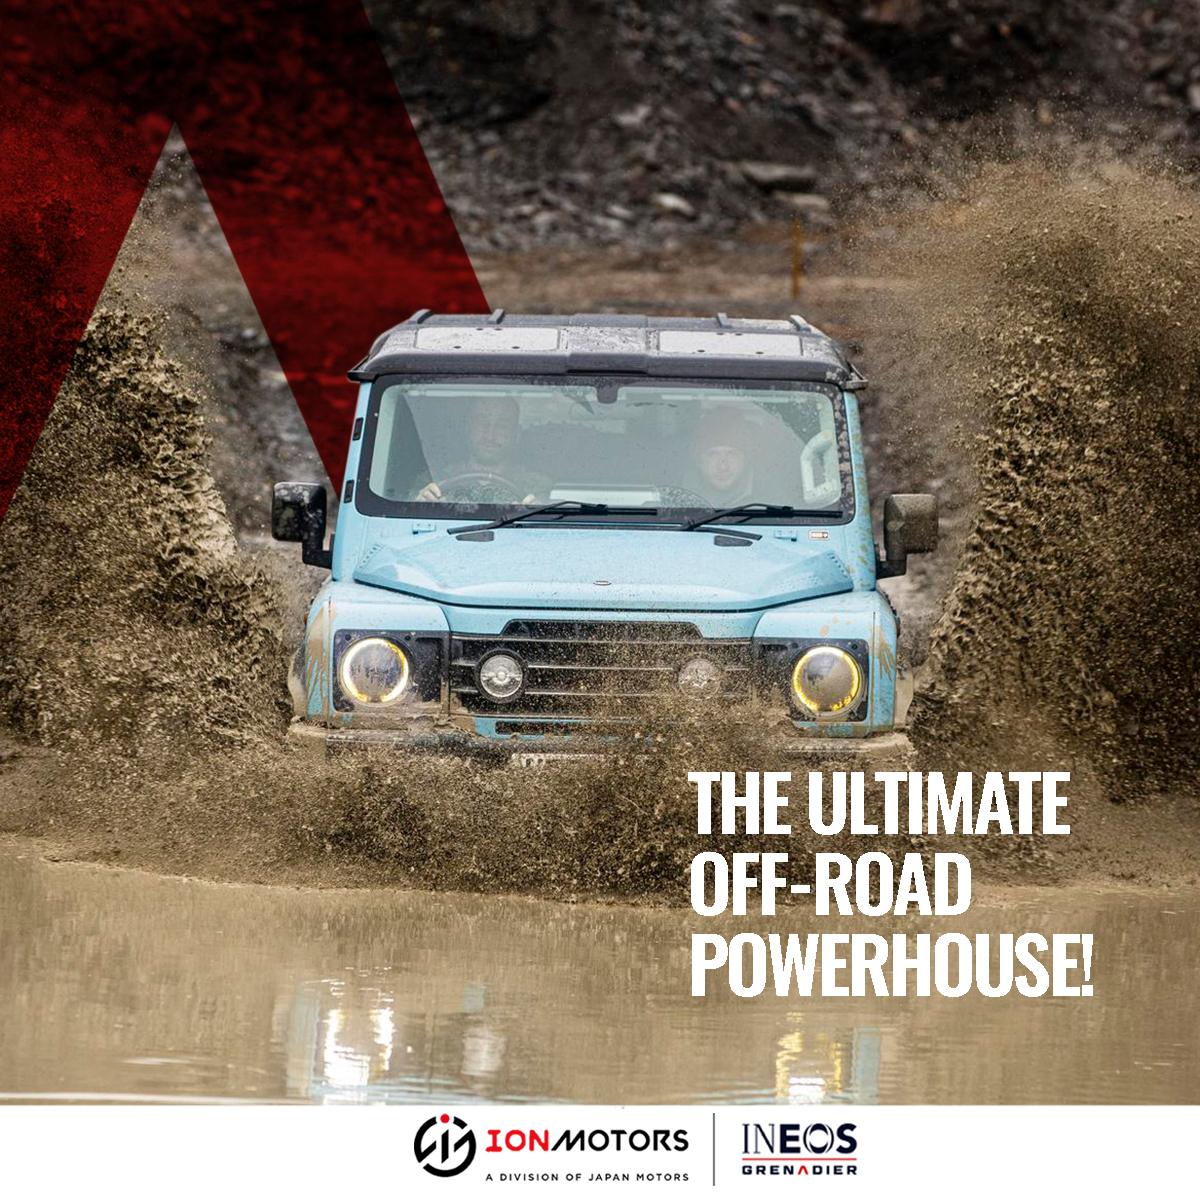 The Ineos Grenadier is ready to take you on a journey beyond imagination – book your test drive at ION Motors today or call +233243700735.

Ion Motors, a division of Japan Motors
#IonMotors #Grenadier #INEOSGrenadier #BuiltOnPurpose #4x4 #offroading #Grenadier4X4 #adventure